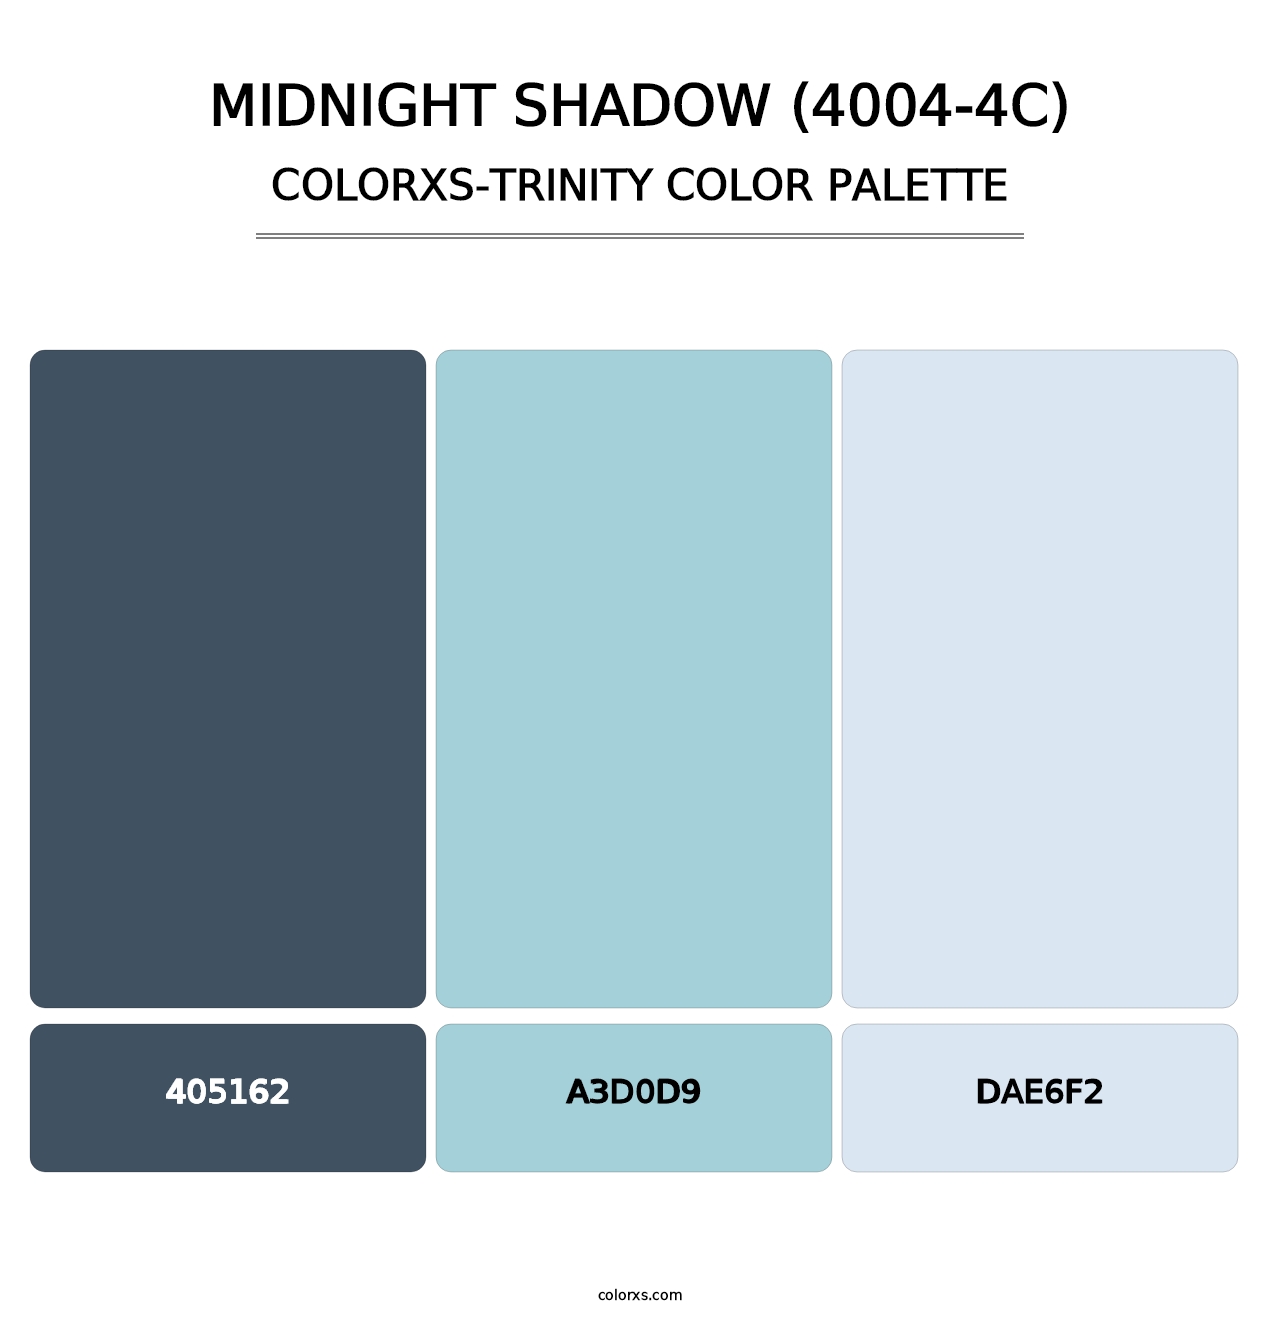 Midnight Shadow (4004-4C) - Colorxs Trinity Palette